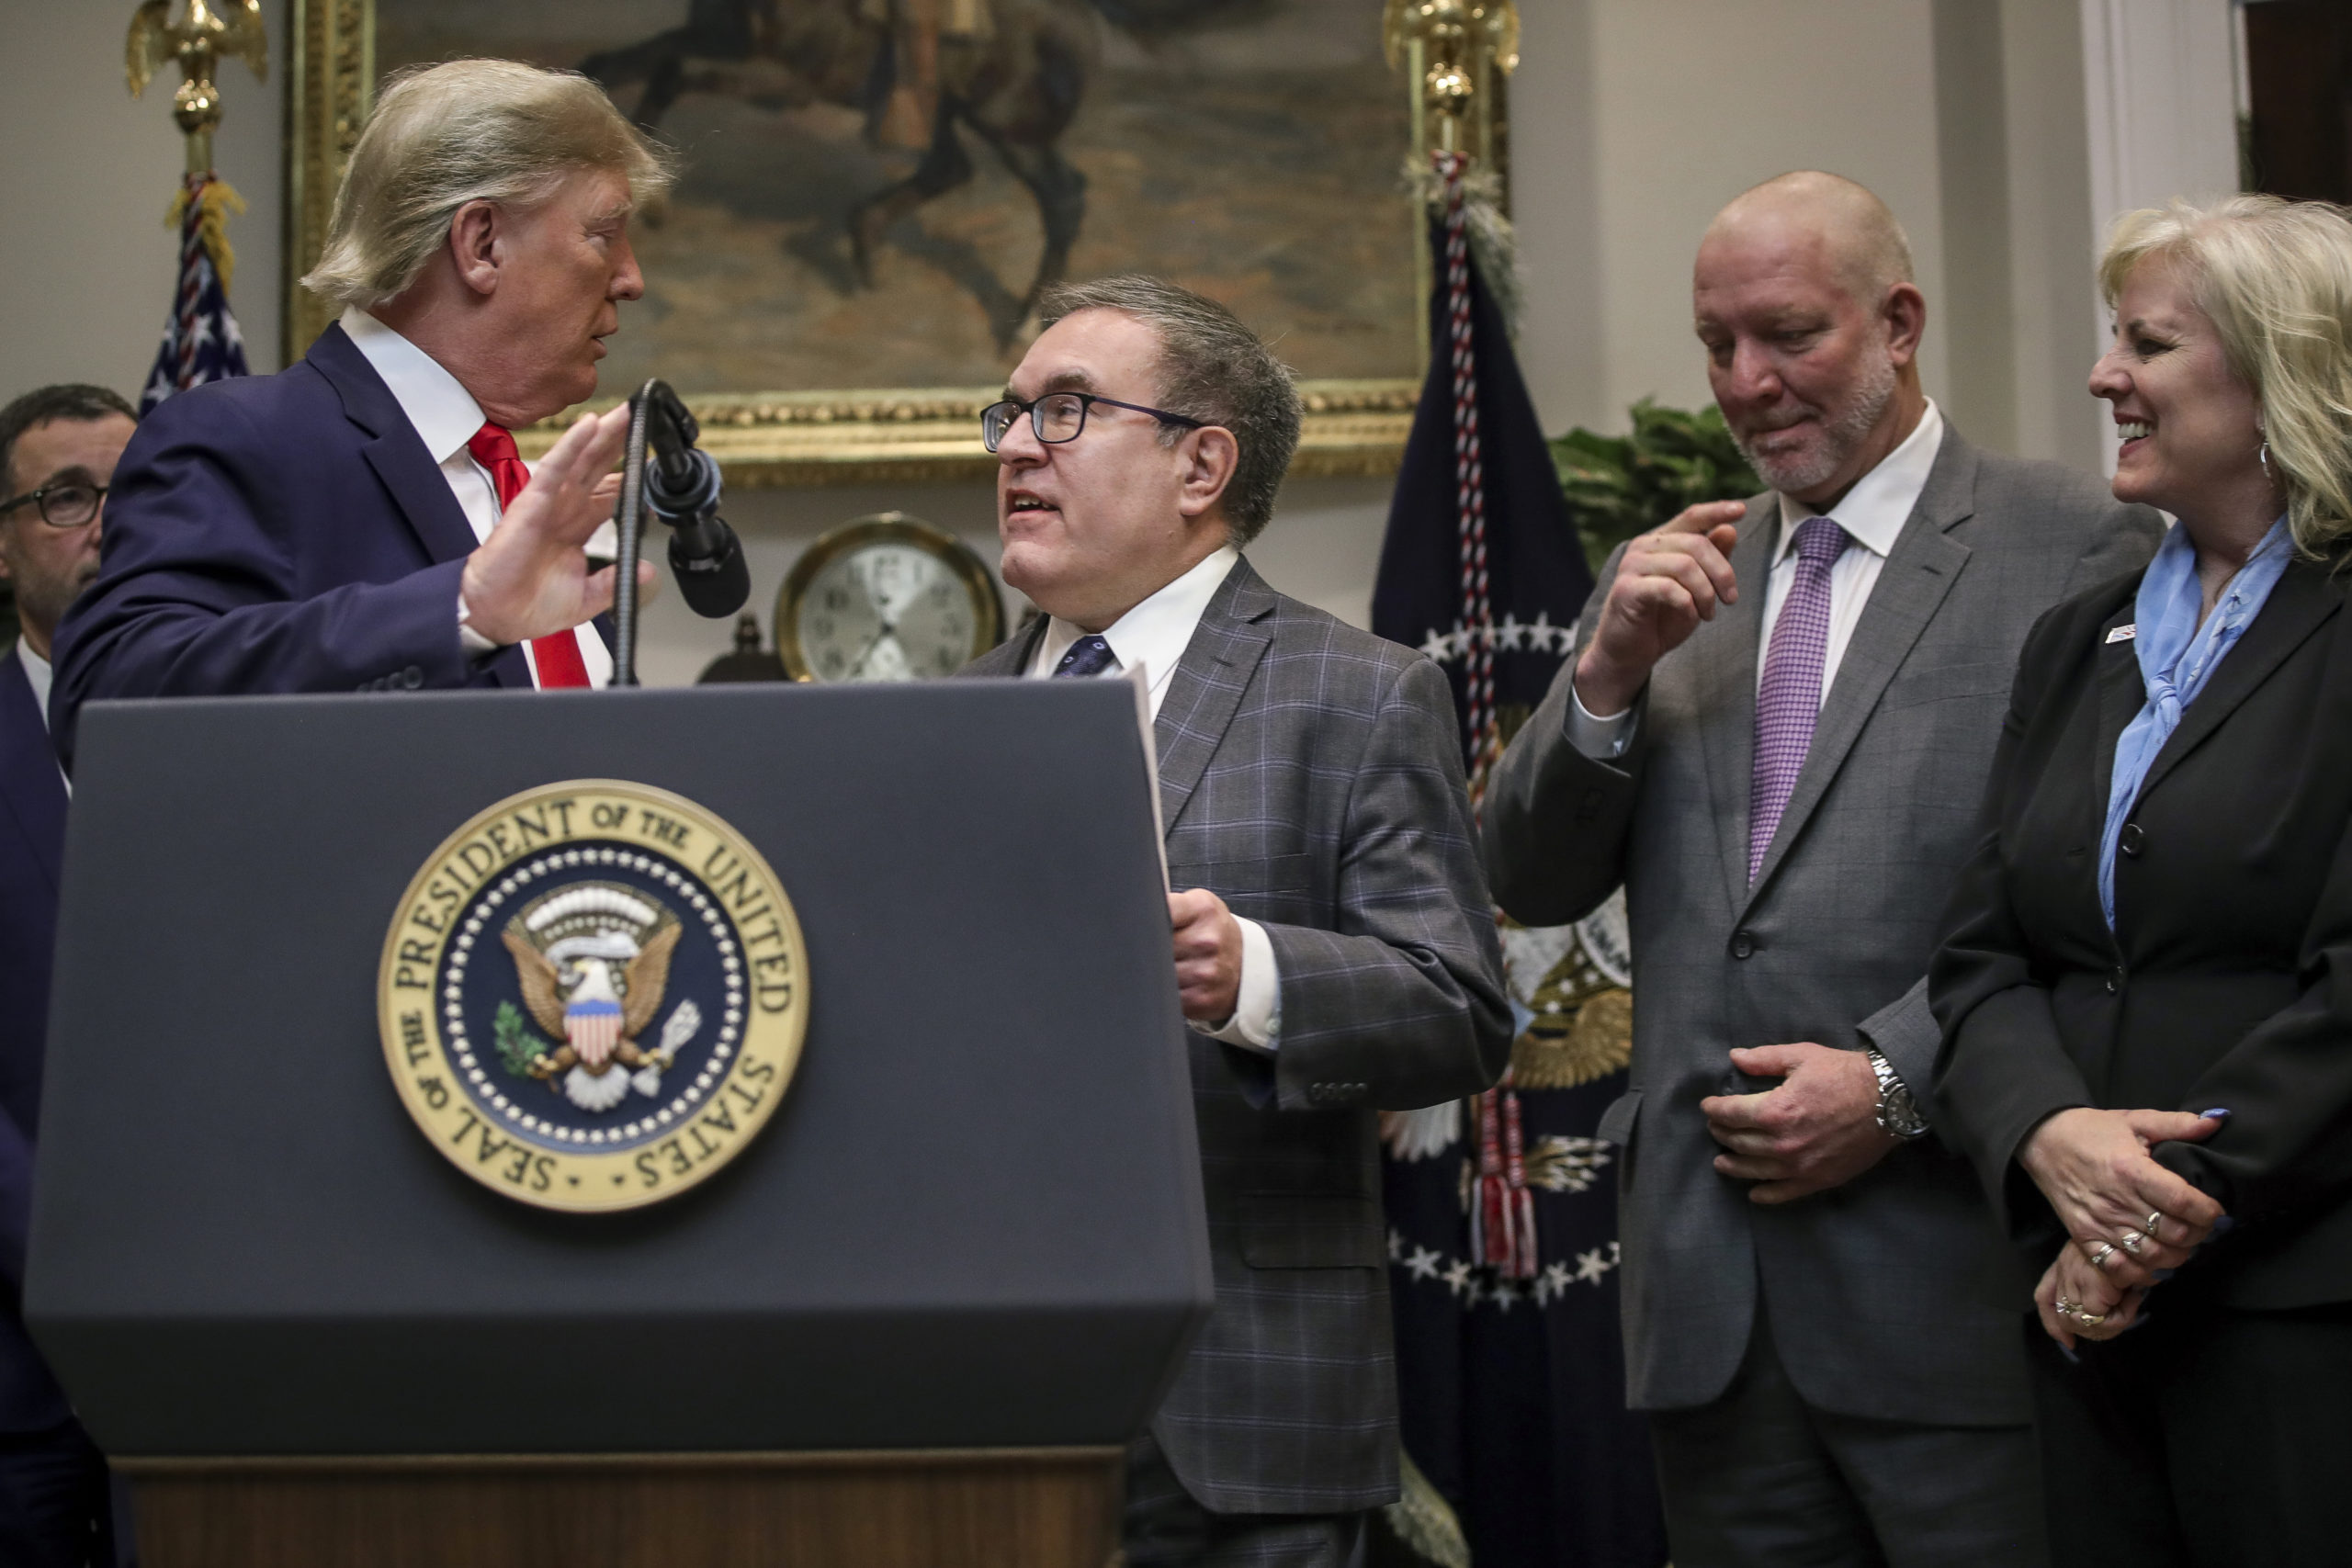 Former President Donald Trump introduces former EPA Administrator Andrew Wheeler at an event to unveil changes to environmental regulations on Jan. 9, 2020. (Drew Angerer/Getty Images)